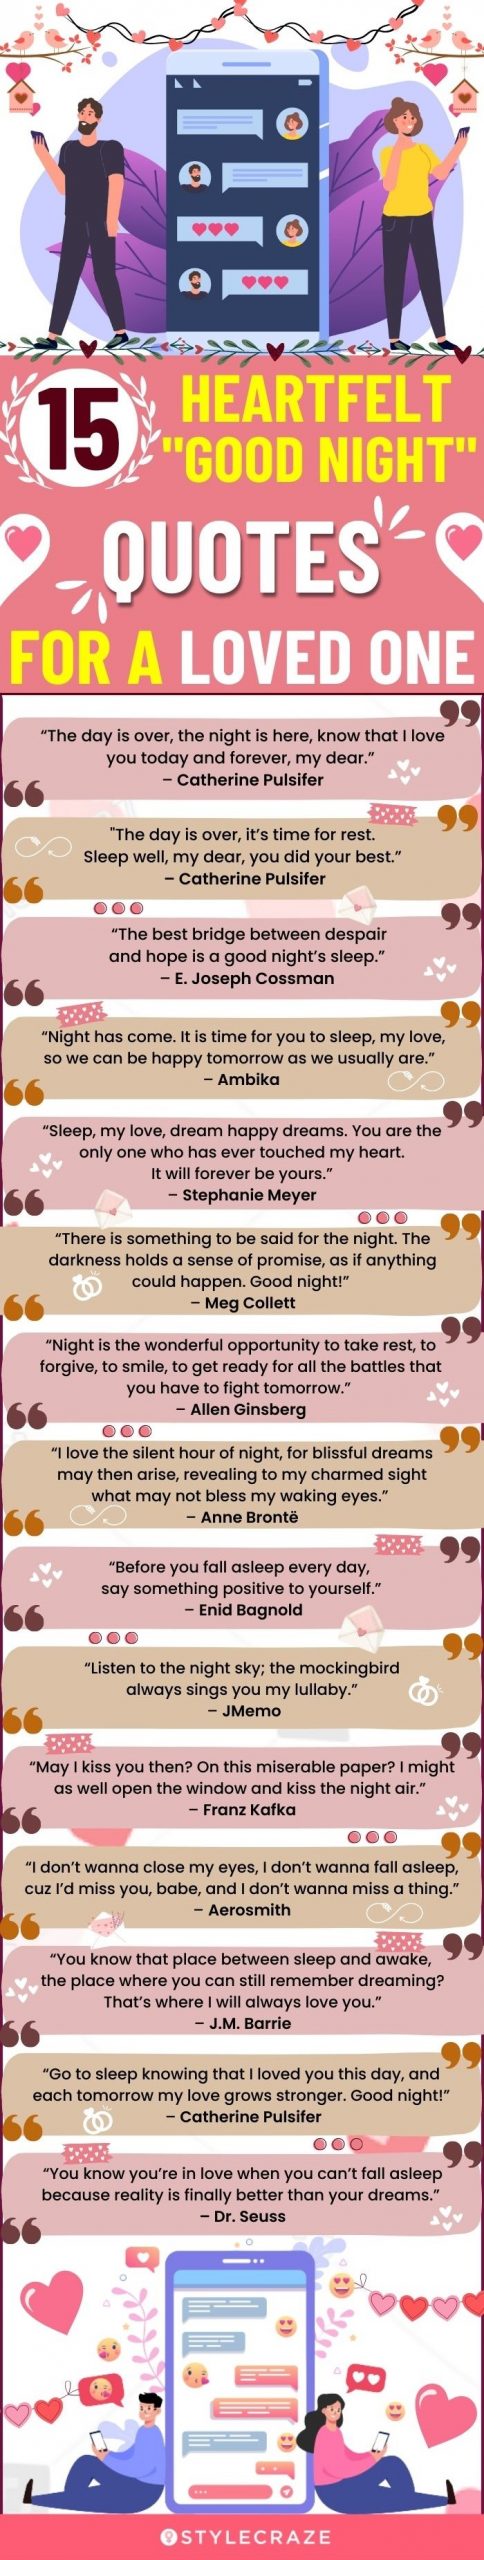 15 heart felt good night quotes for a loved ones (infographic)